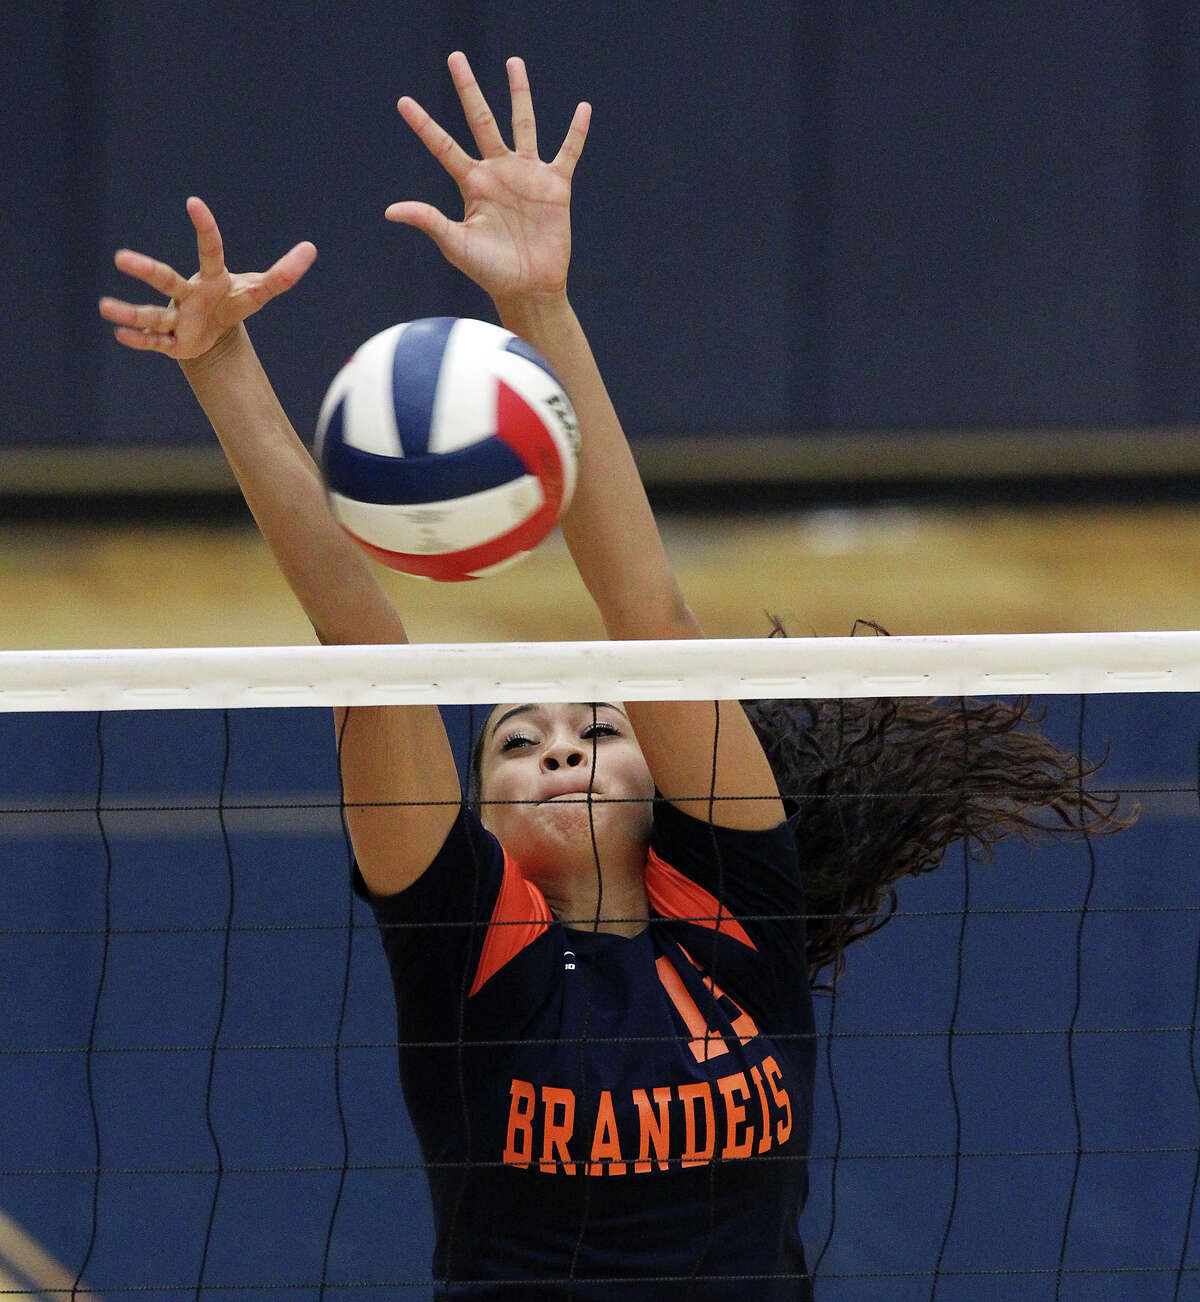 Brandeis' DeeDee Cardenas (13) makes a block against Warren in high school volleyball at Taylor Fieldhouse on Wednesday, Sept. 26, 2012.